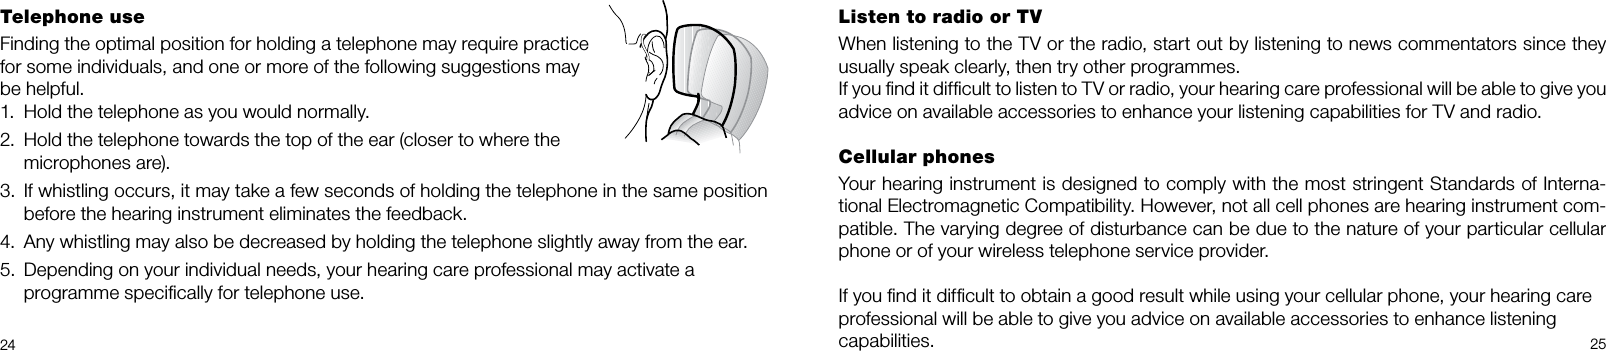 2425Listen to radio or TVWhen listening to the TV or the radio, start out by listening to news commentators since they usually speak clearly, then try other programmes.If you ﬁnd it difﬁcult to listen to TV or radio, your hearing care professional will be able to give you advice on available accessories to enhance your listening capabilities for TV and radio.Cellular phonesYour hearing instrument is designed to comply with the most stringent Standards of Interna-tional Electromagnetic Compatibility. However, not all cell phones are hearing instrument com-patible. The varying degree of disturbance can be due to the nature of your particular cellular phone or of your wireless telephone service provider.If you ﬁnd it difﬁcult to obtain a good result while using your cellular phone, your hearing careprofessional will be able to give you advice on available accessories to enhance listeningcapabilities.Telephone useFinding the optimal position for holding a telephone may require practice for some individuals, and one or more of the following suggestions may be helpful.Hold the telephone as you would normally.1. Hold the telephone towards the top of the ear (closer to where the 2. microphones are).If whistling occurs, it may take a few seconds of holding the telephone in the same position 3. before the hearing instrument eliminates the feedback.Any whistling may also be decreased by holding the telephone slightly away from the ear.4. Depending on your individual needs, your hearing care professional may activate a  5. programme speciﬁcally for telephone use.